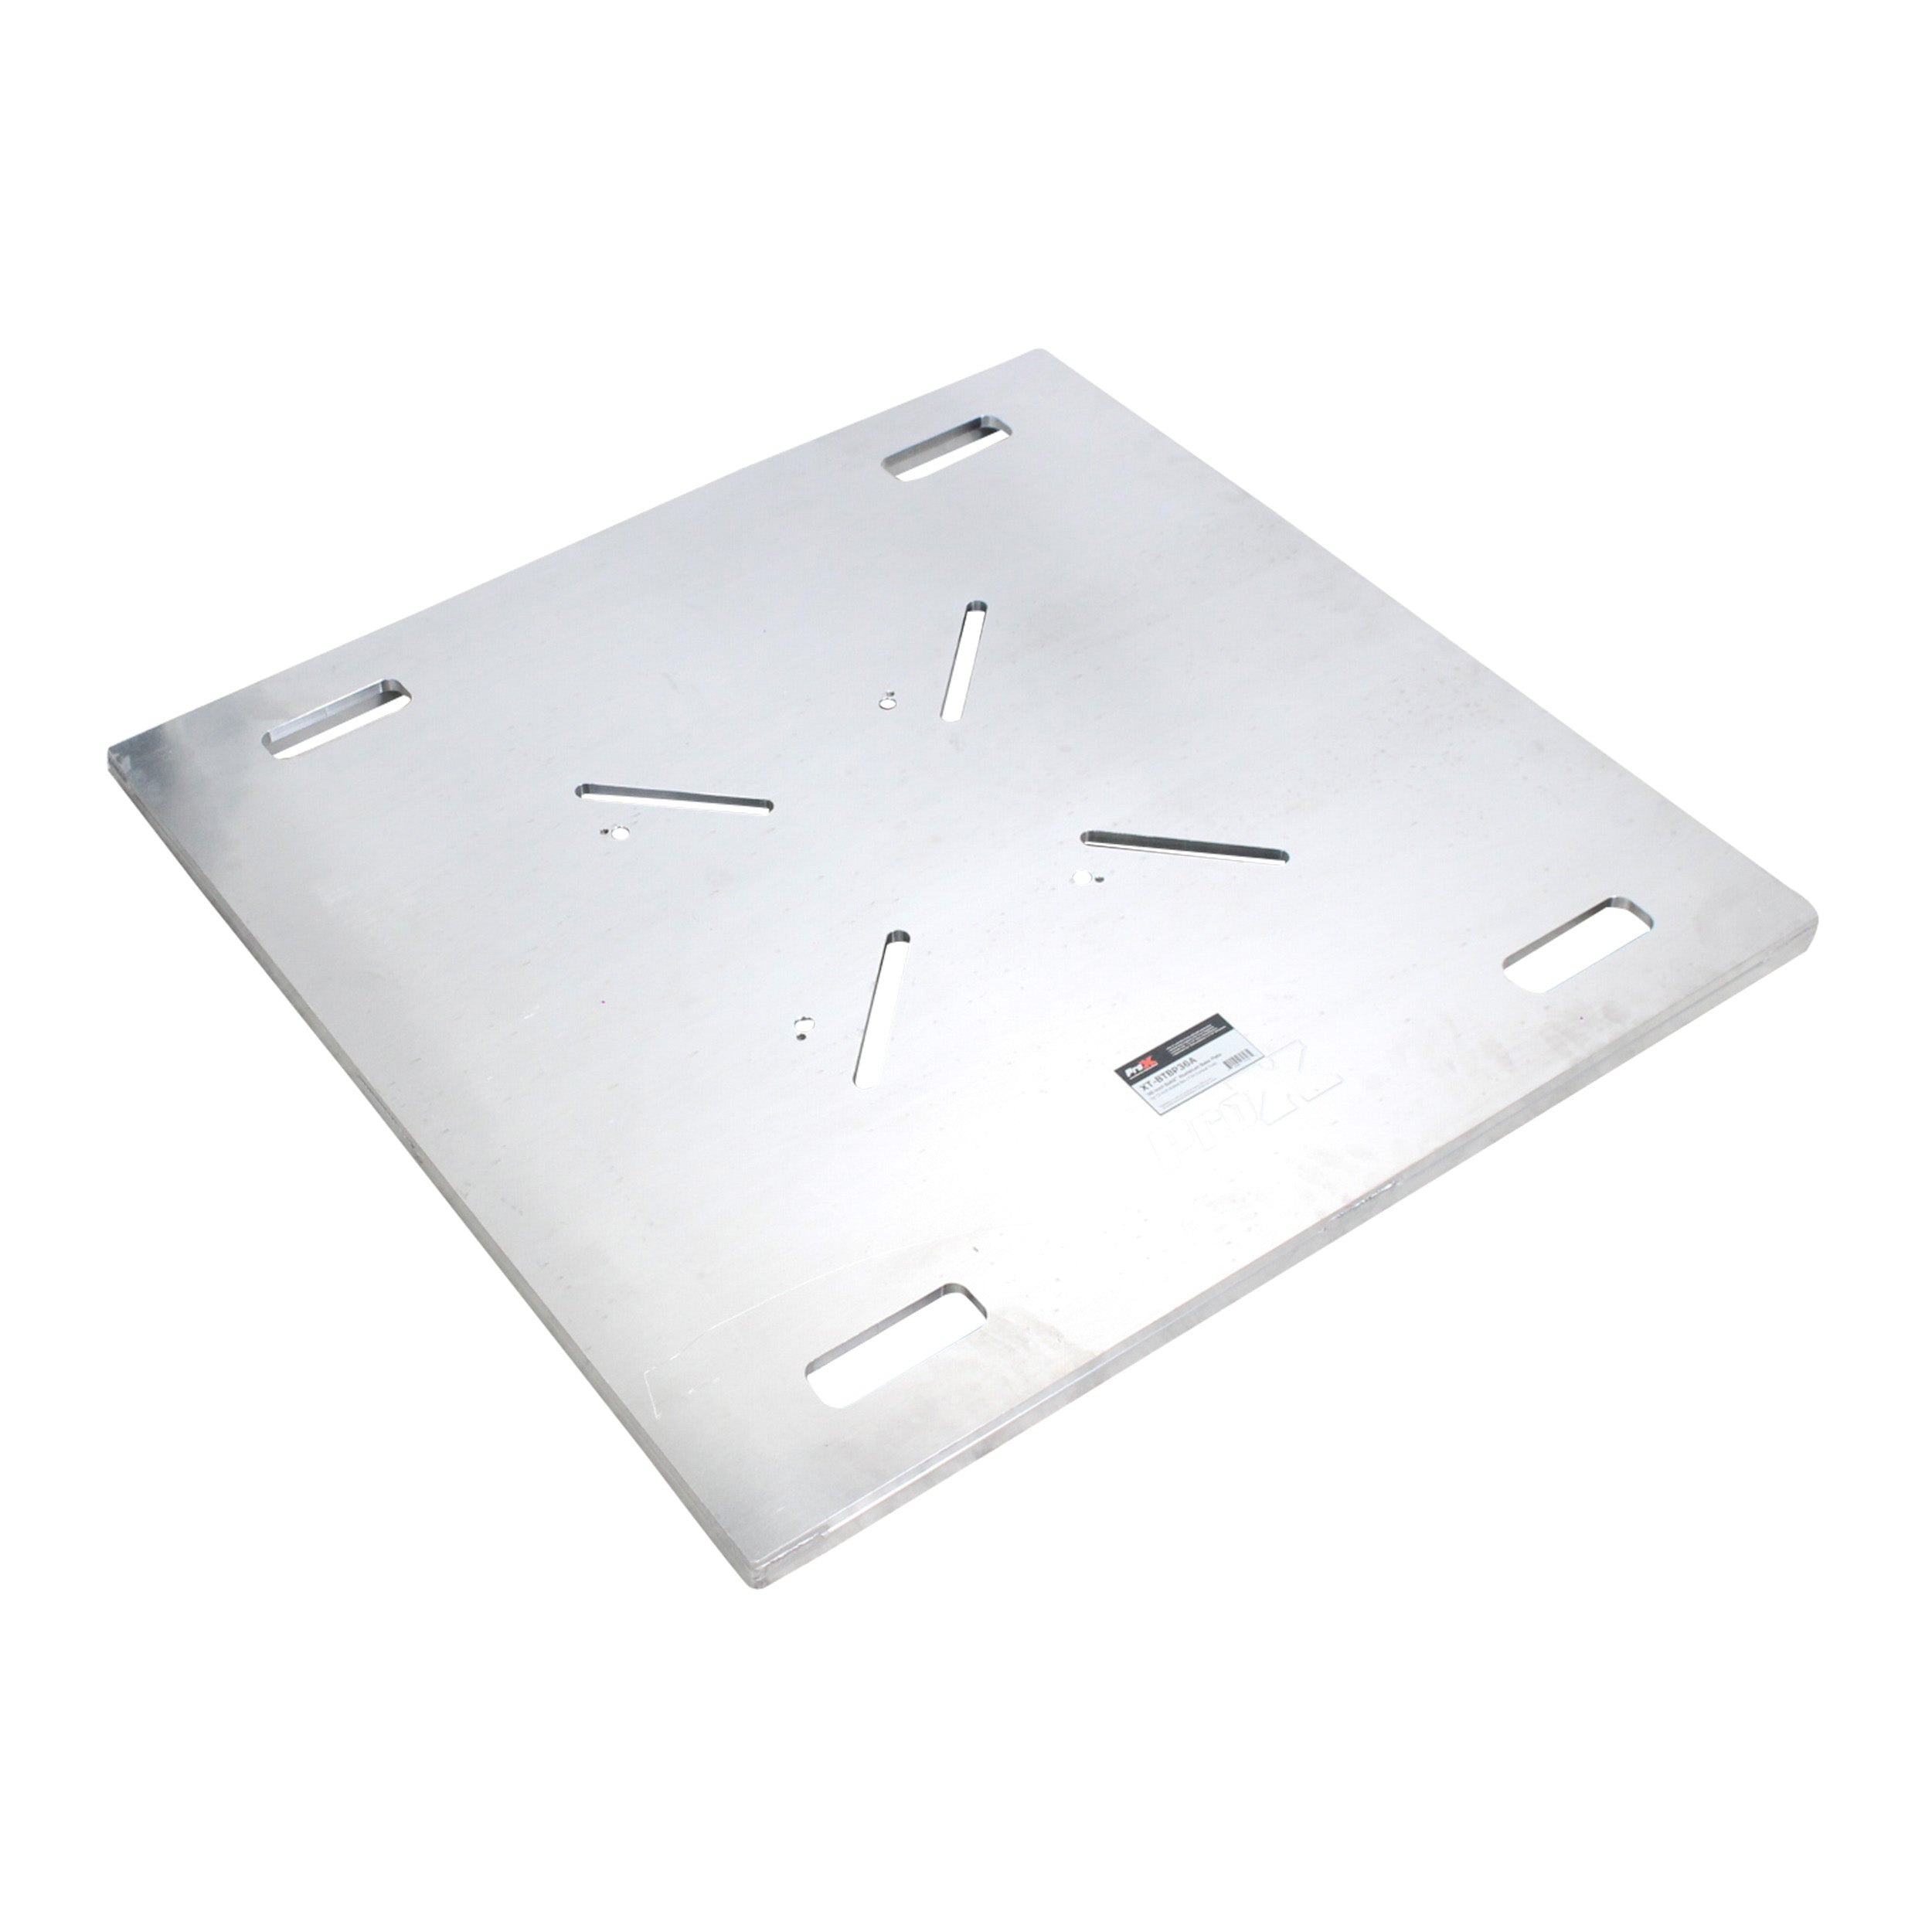 Pro X 36 Inch Aluminum BoltX Base Plate, Top Plate on a 1″ Raised Frame for Standard 12-16 Inch Bolted or F34 Box Truss XT-BTBP36A